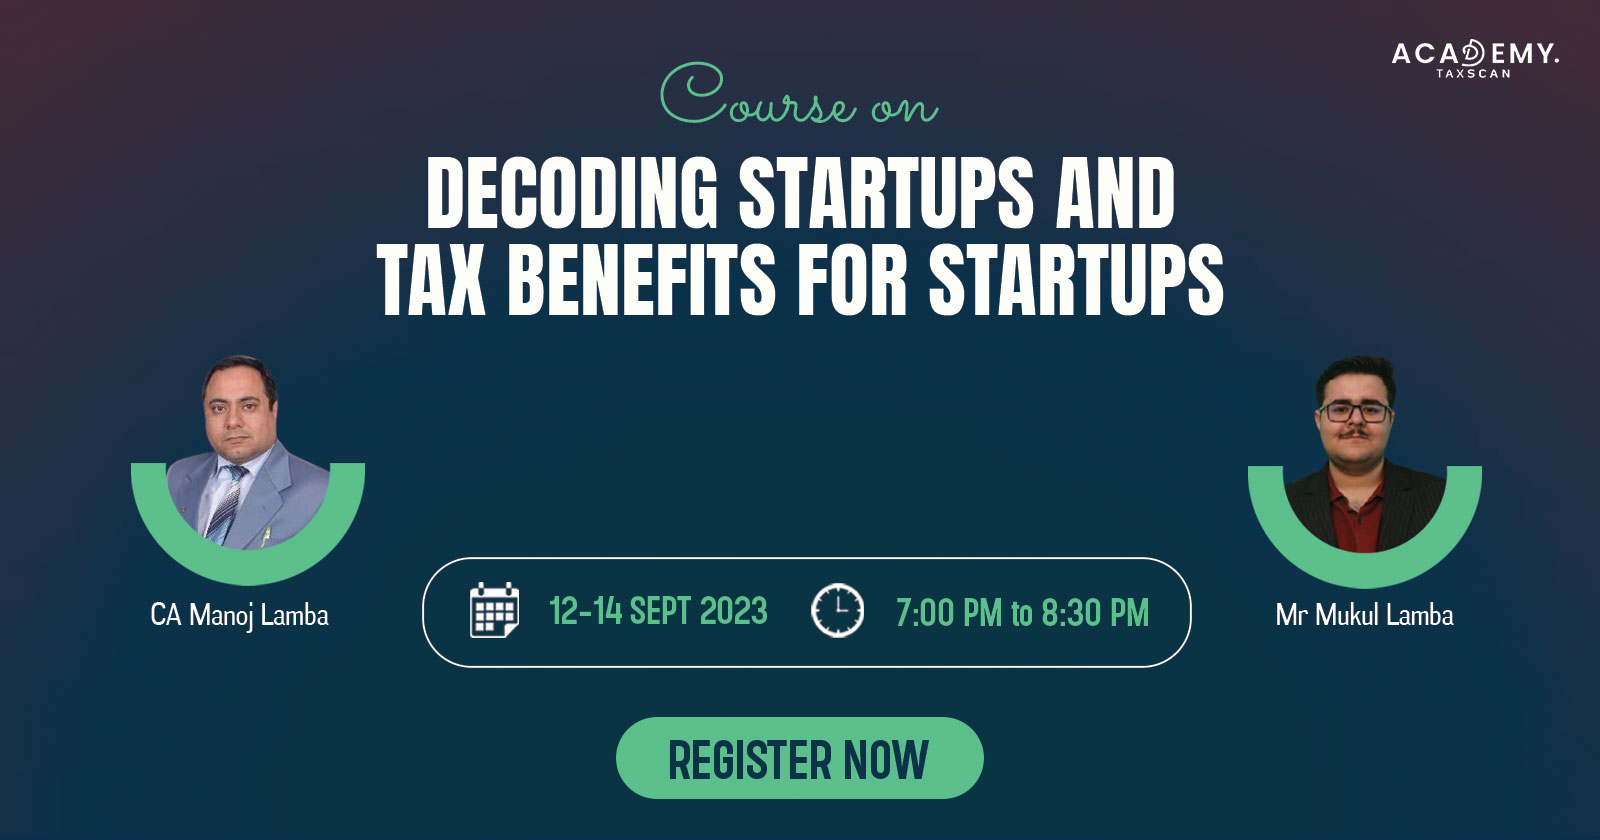 Course on Decoding Startups - Decoding Startups - Startups - Course - Decoding - Tax Benefits for Startups - Tax Benefits - Tax - Decoding Startups and Tax Benefits for Startups - online certificate course - Course 2023 - Course - certificate course 2023 - online certificate course 2023 - taxscan academy